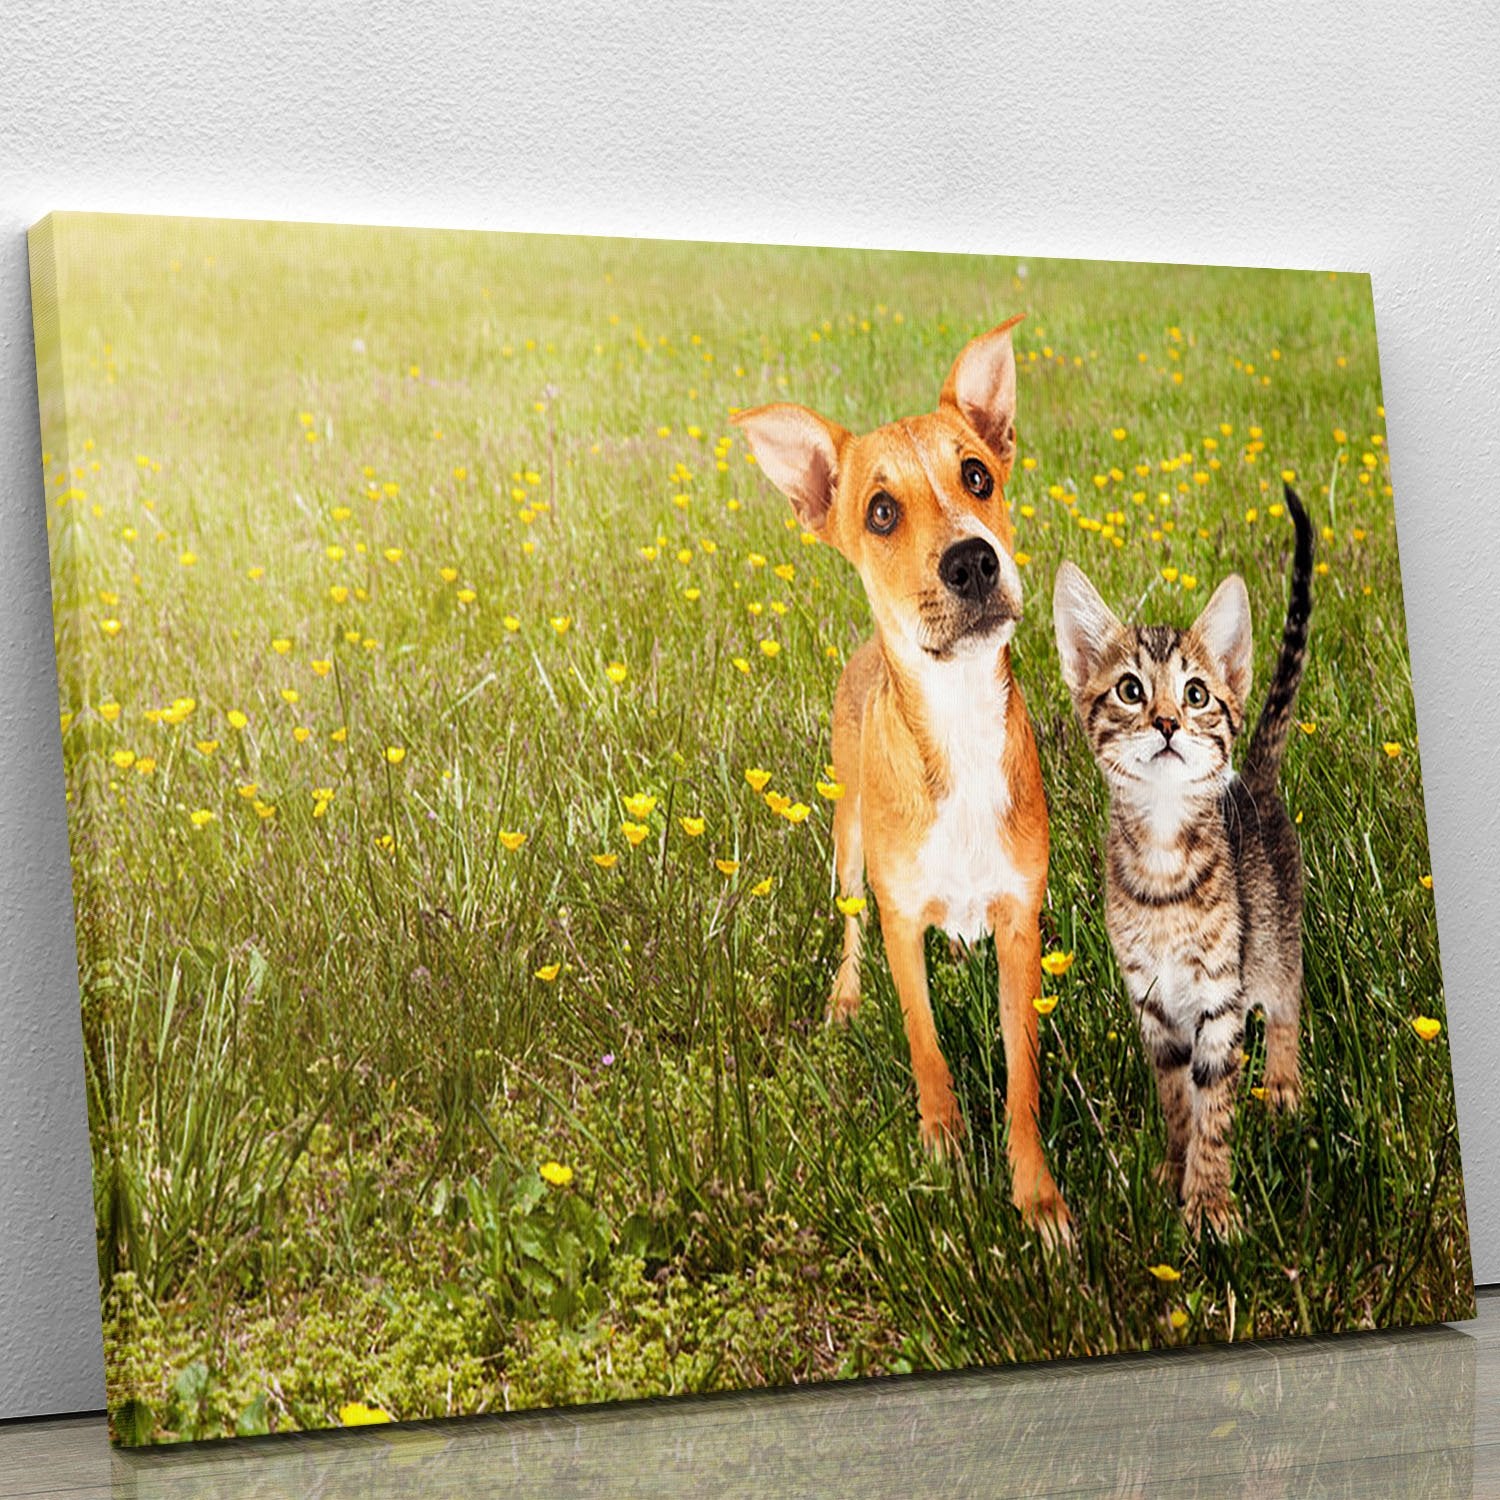 Cute kitten and puppy together in a field Canvas Print or Poster